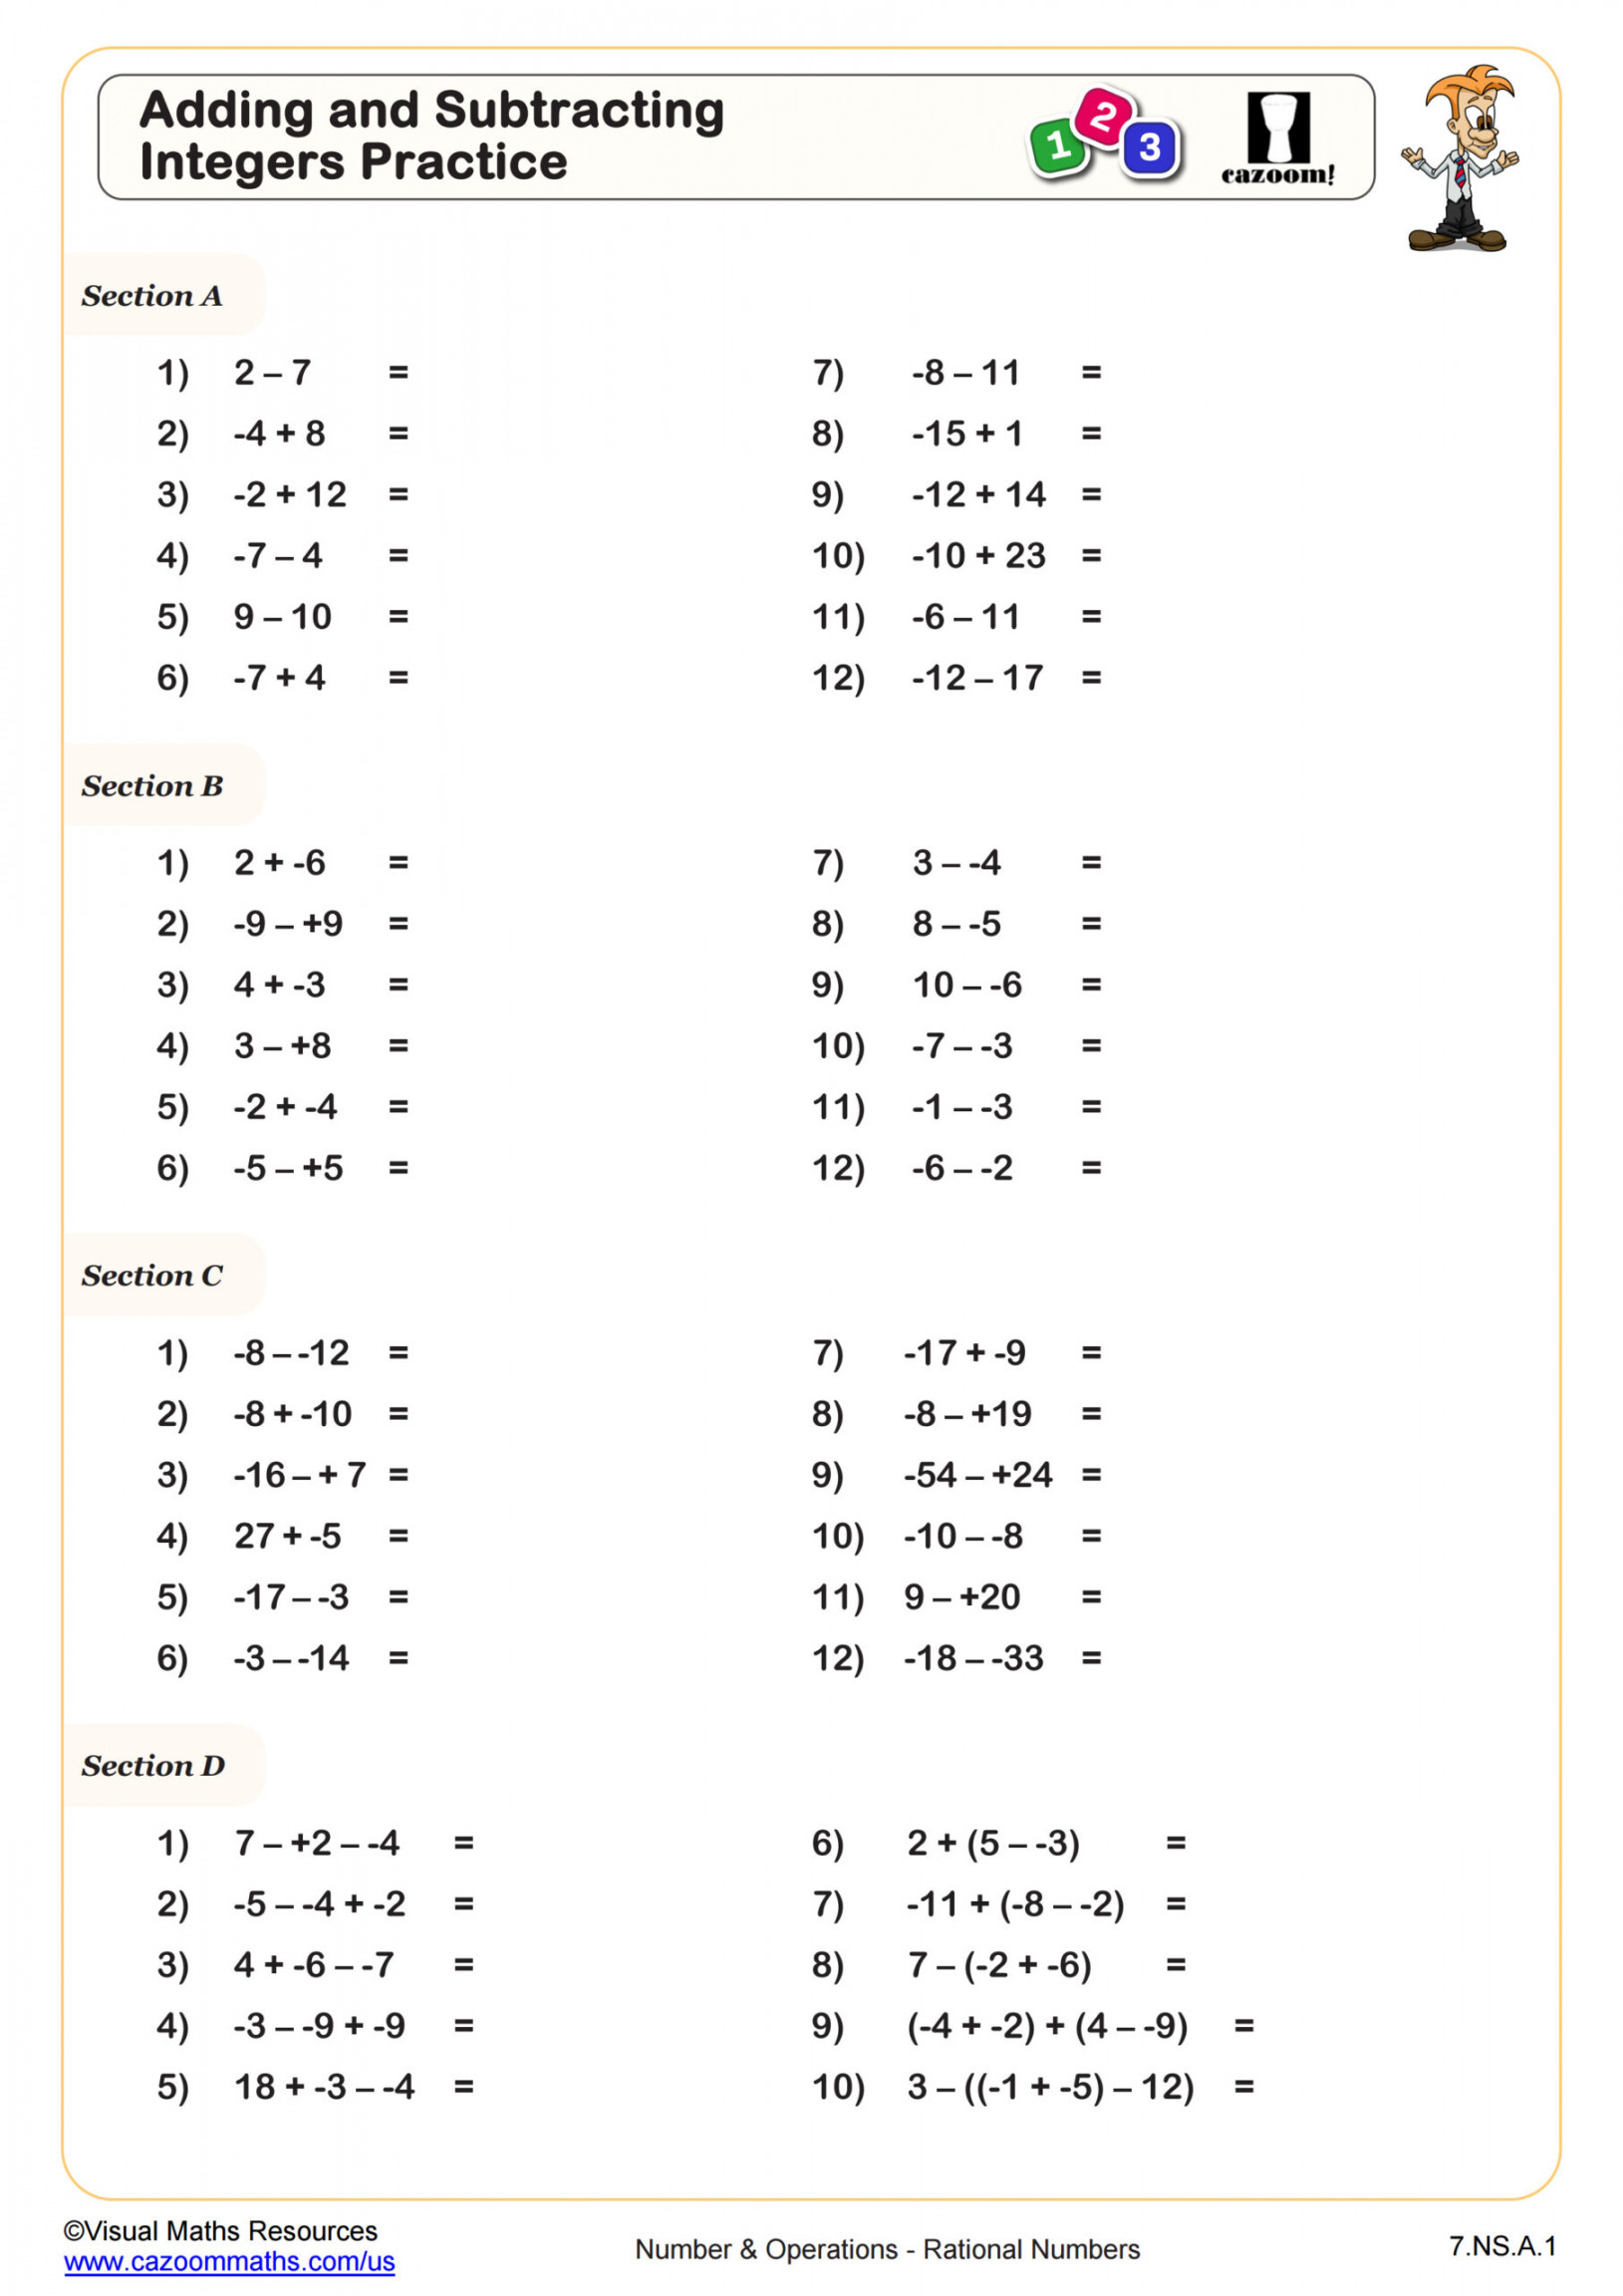 Adding and Subtracting Integers Practice Worksheet  th Grade PDF